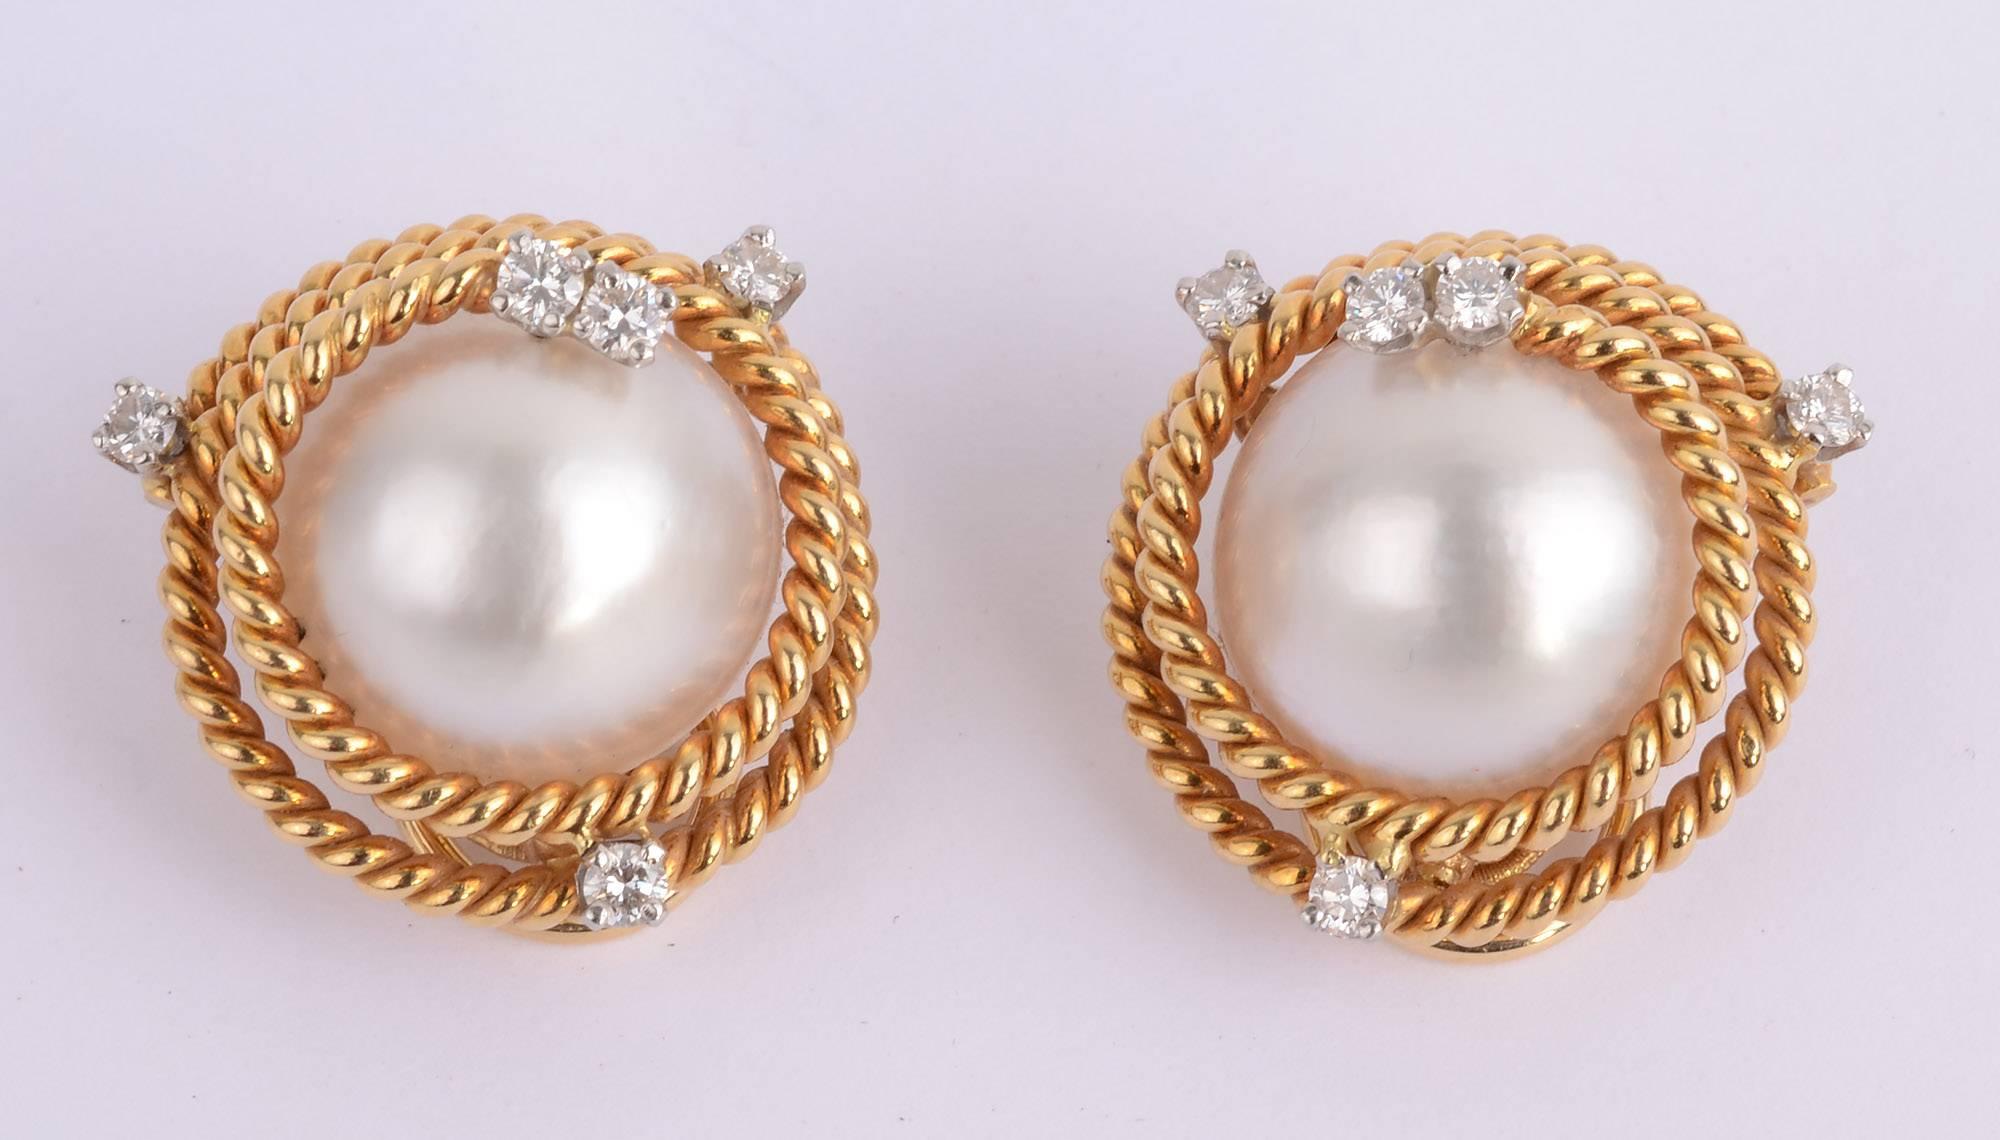 Pair of gold and mabé pearl and diamond earclips by Jean Schlumberger for  Tiffany & Co.
Two mabé pearls, approximately 15.0 mm., are wrapped in rope-twist 18 karat gold, accented by 10 round diamonds approximately .50 ct.
 With signed pouch and